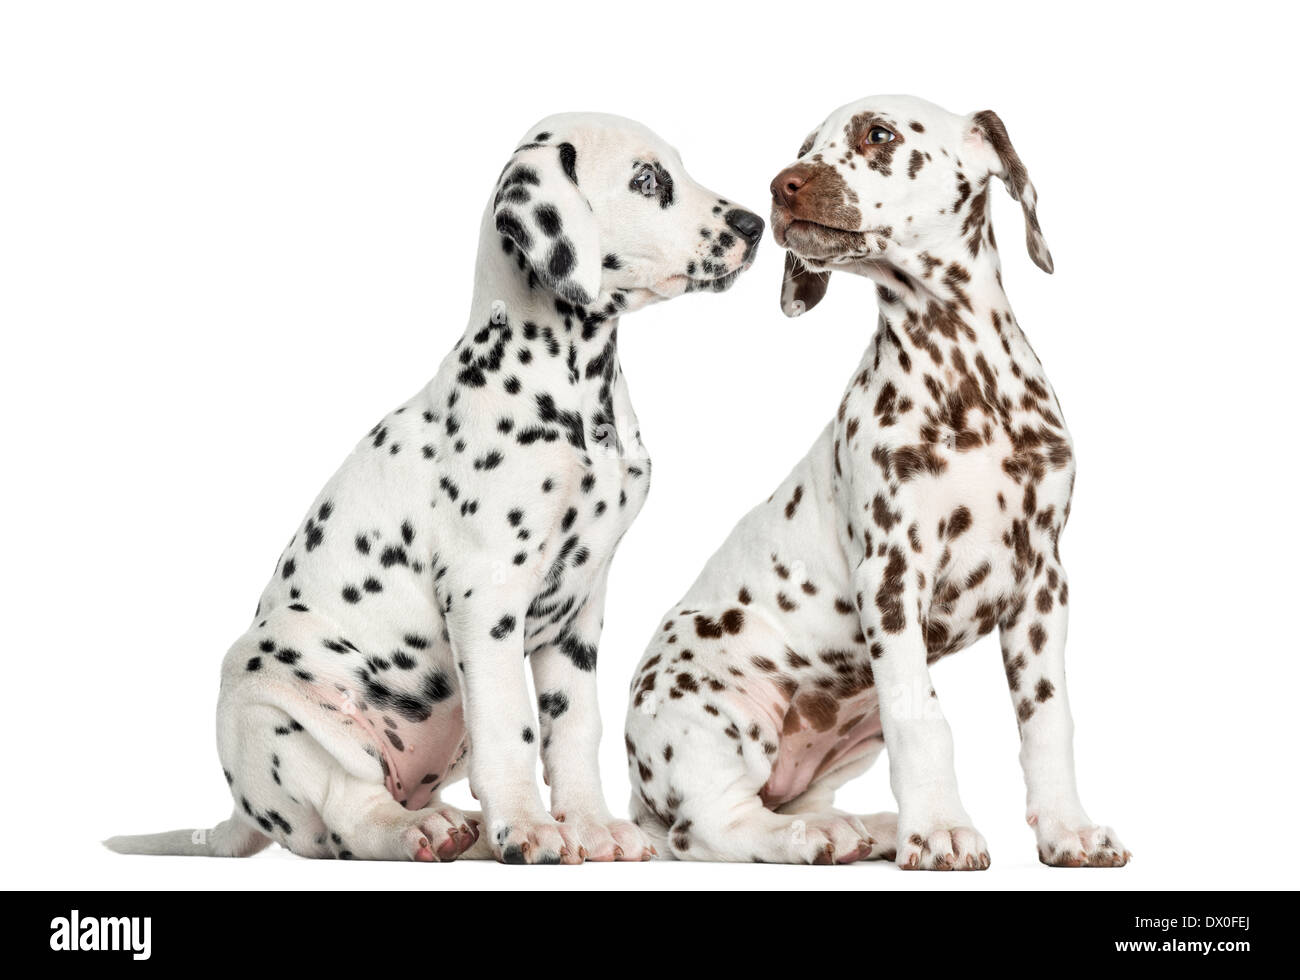 Dalmatian puppies sitting, sniffing each other against white background Stock Photo